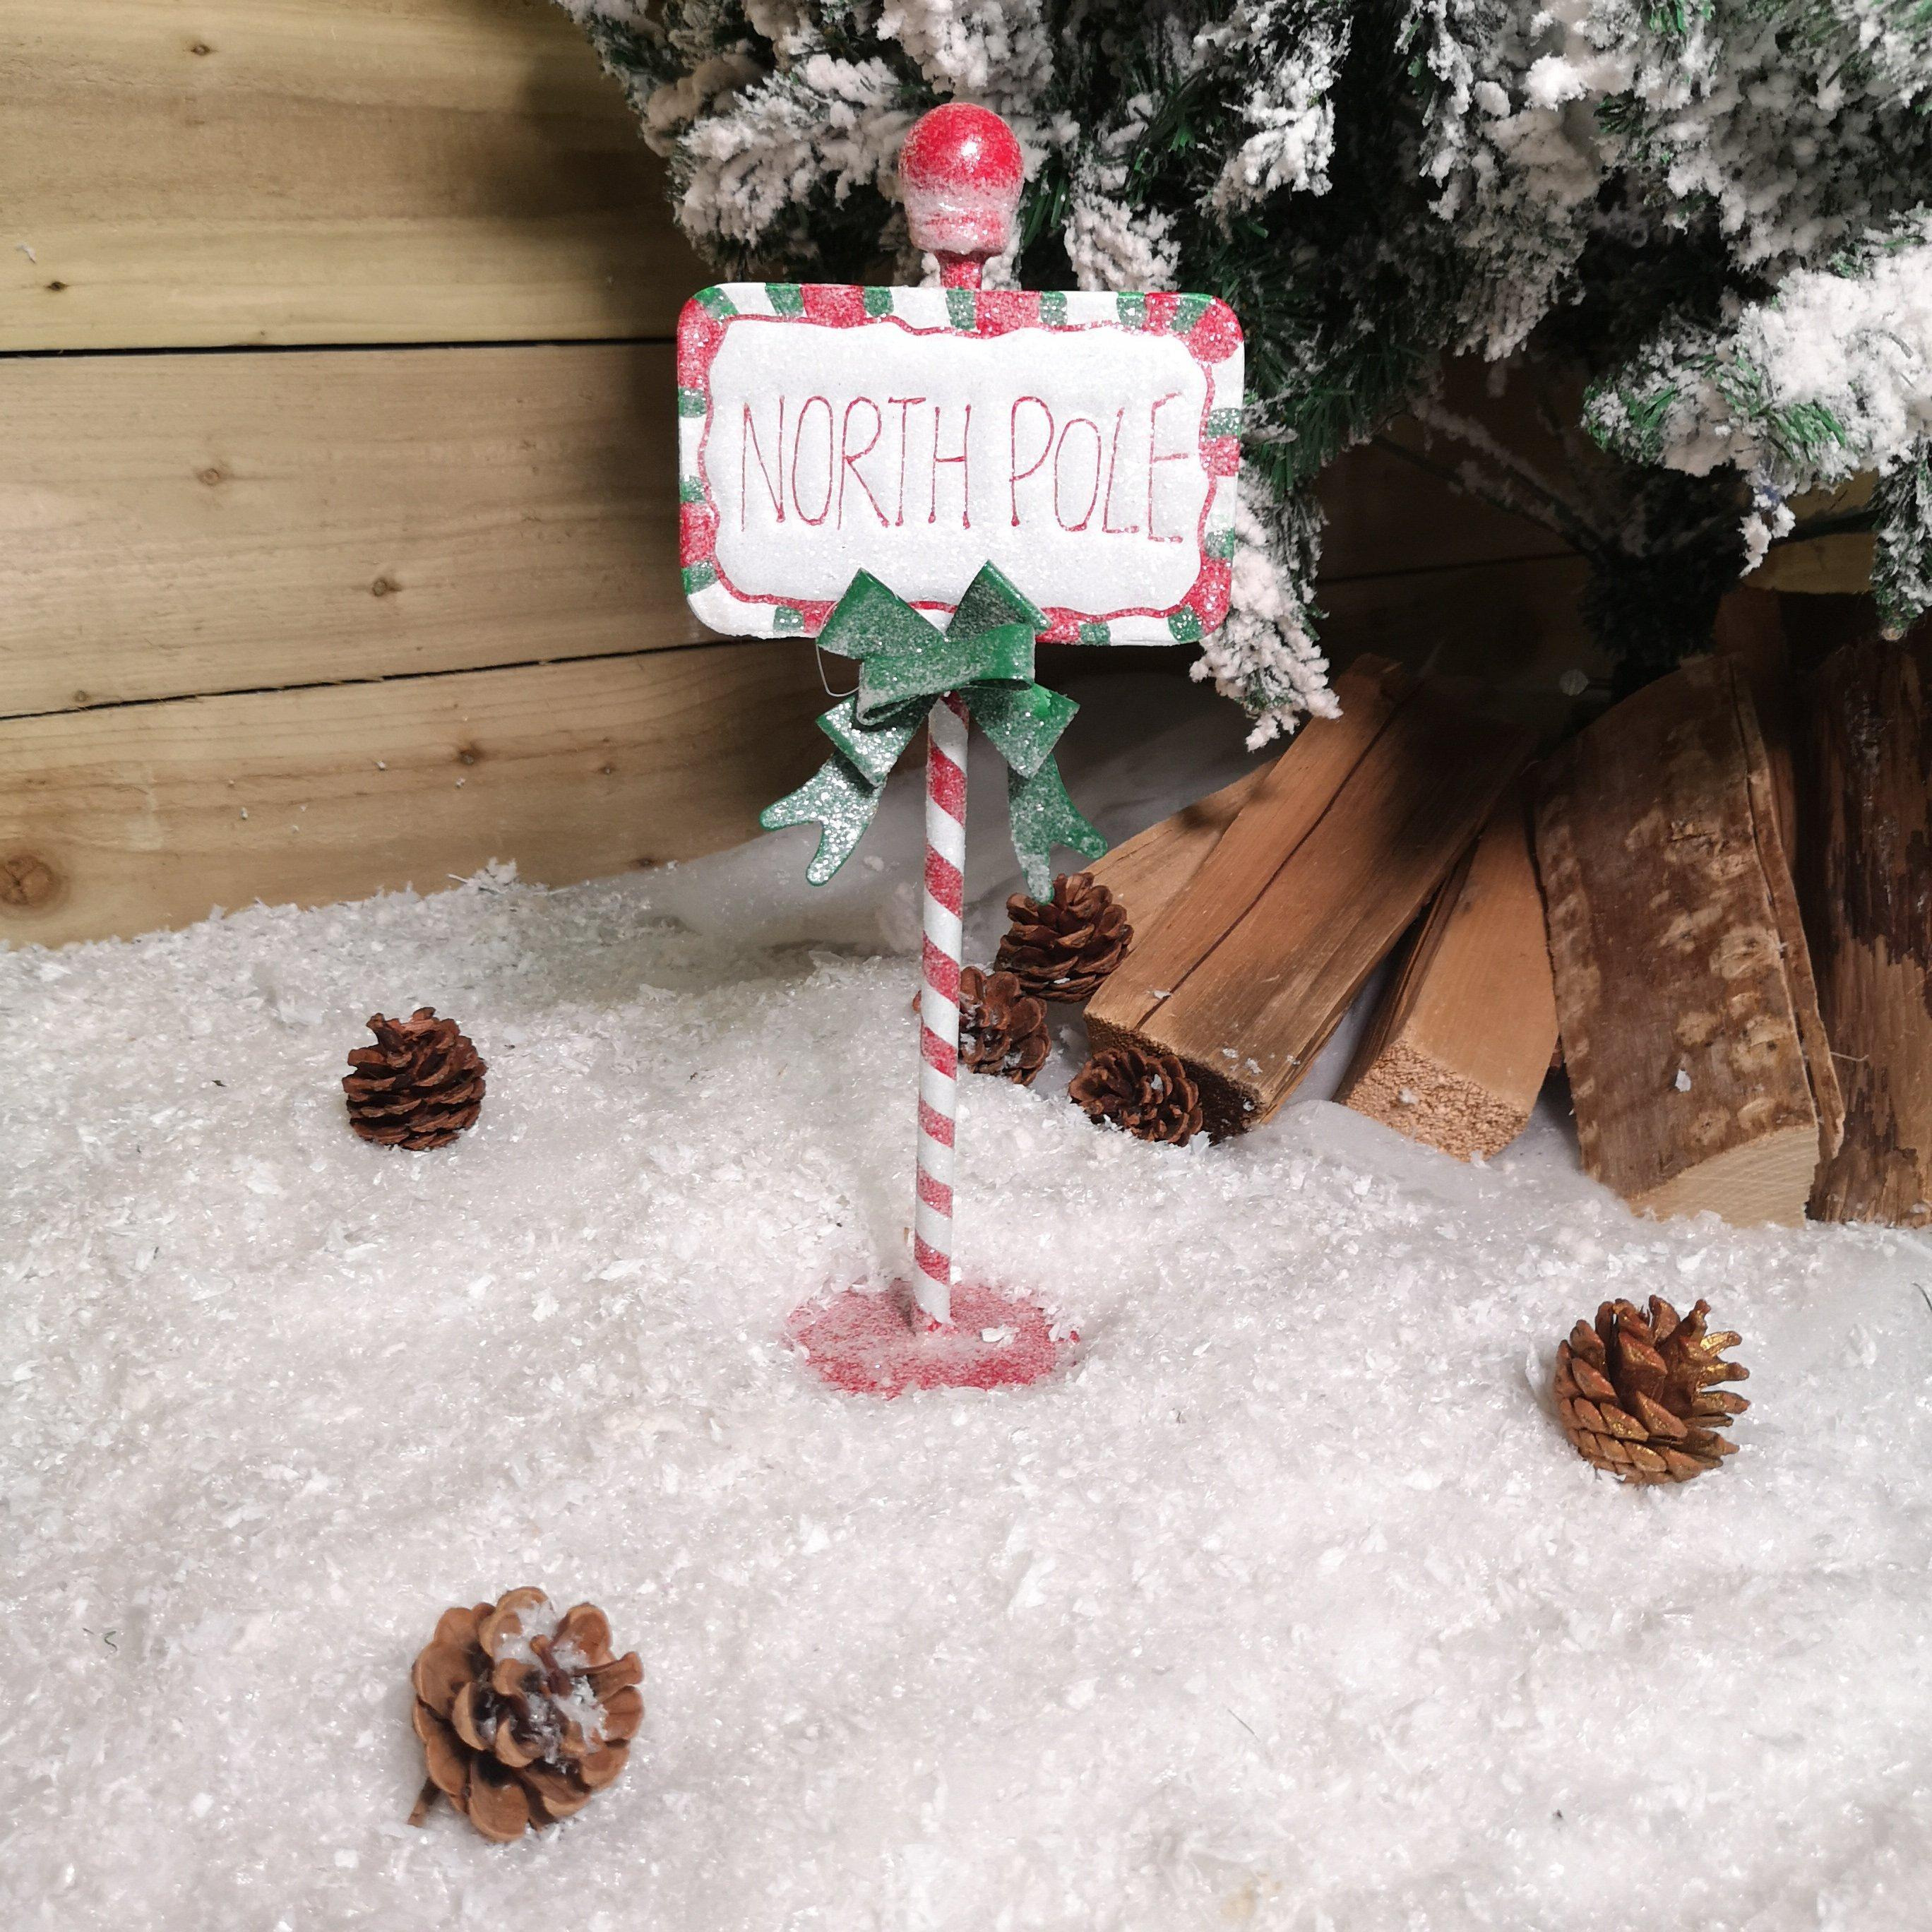 33cm North Pole Christmas Decoration Novelty Sign in Candy Cane Design - image 1